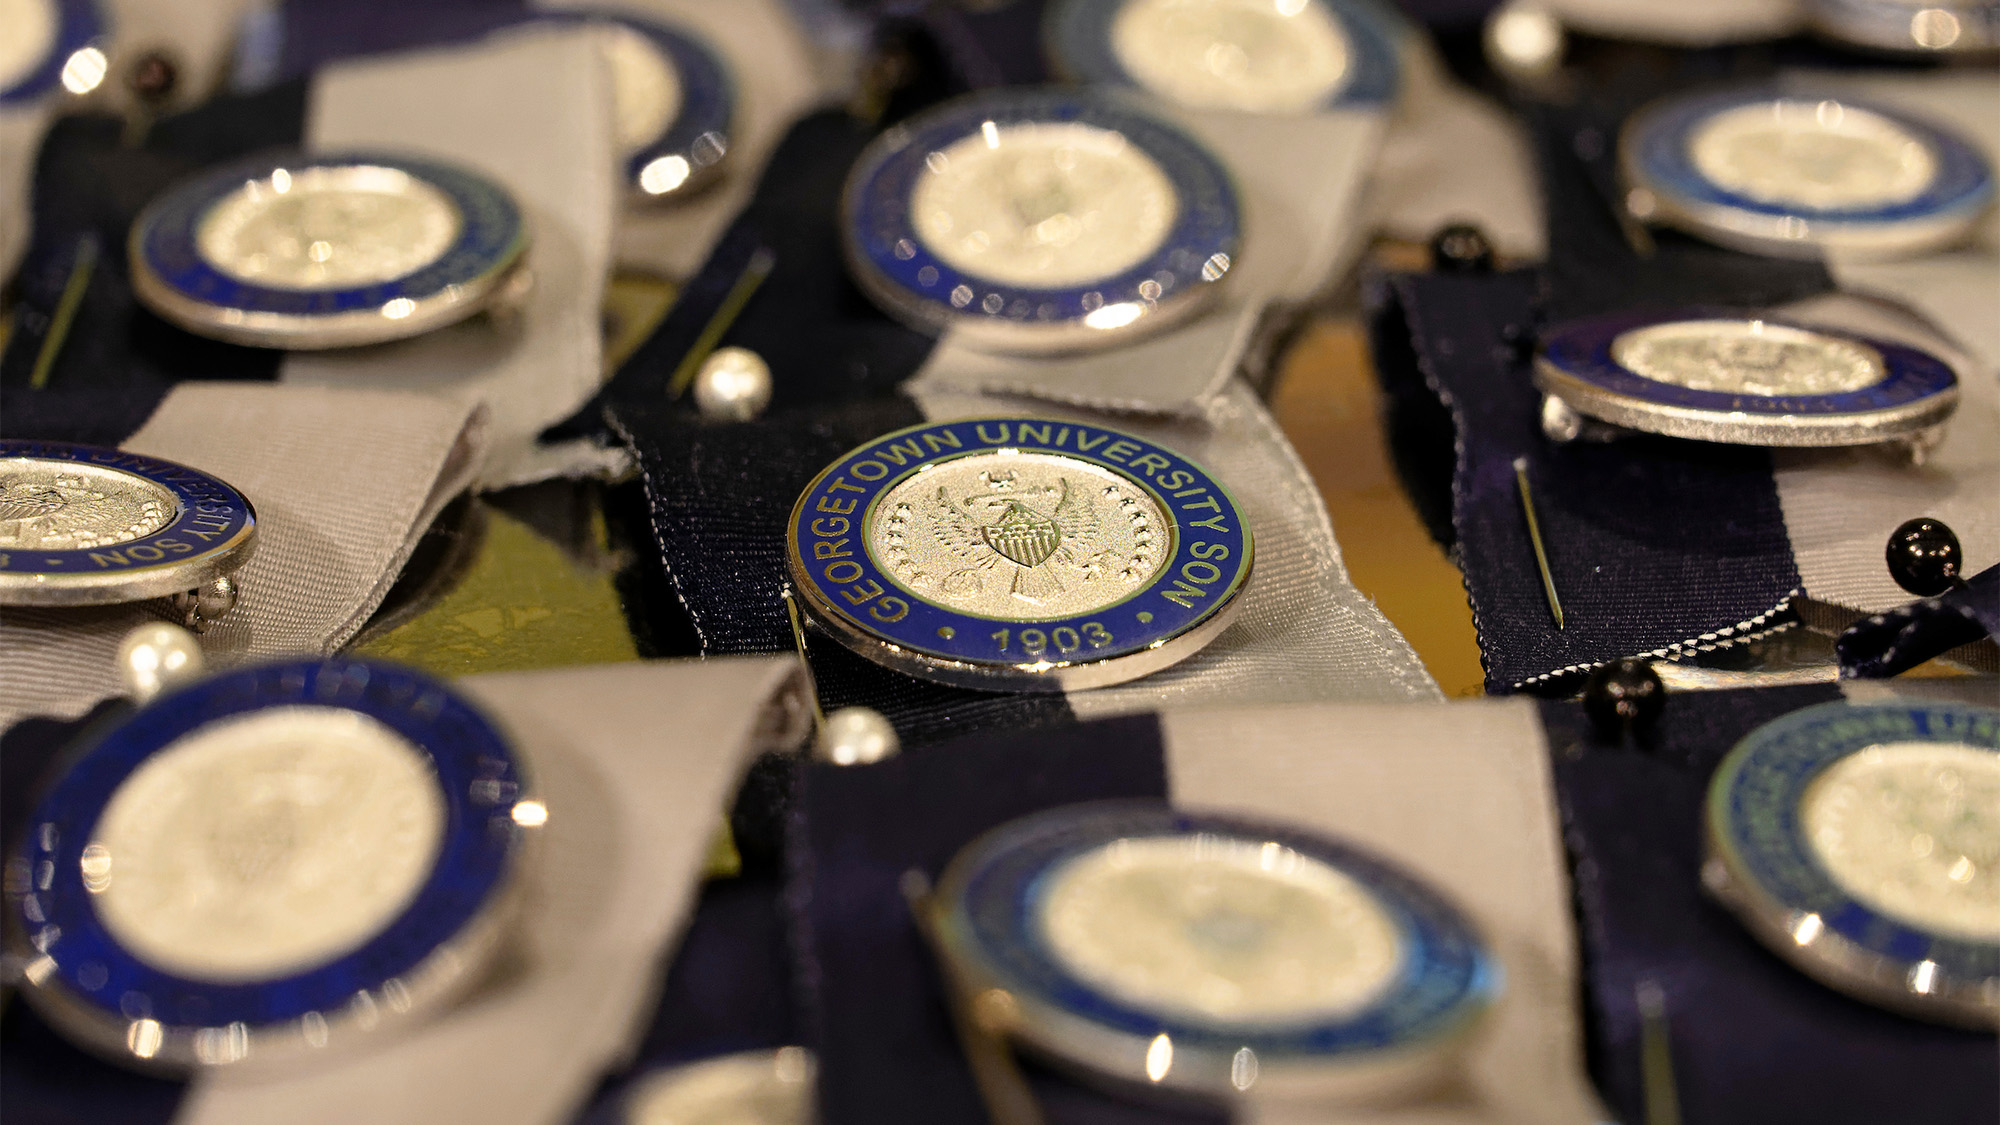 A collection of nursing pins attached to blue and white ribbons laid out on a tray